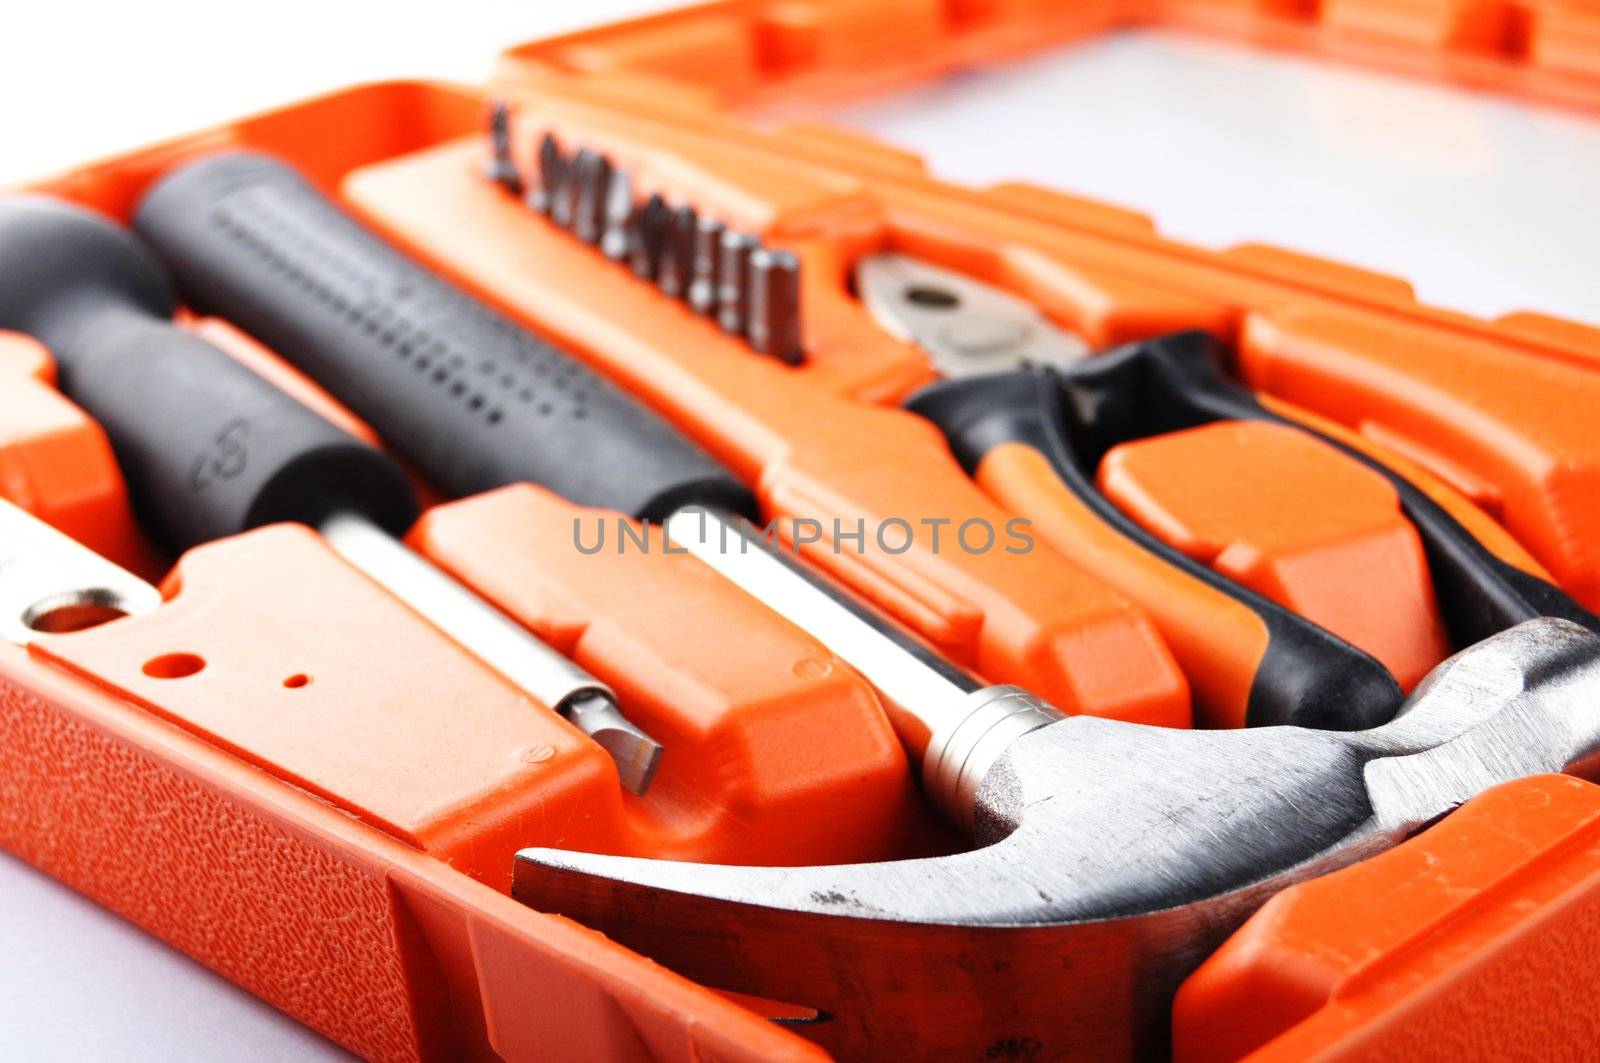 toolbox kit with hammer and screwdriver showing construction concept